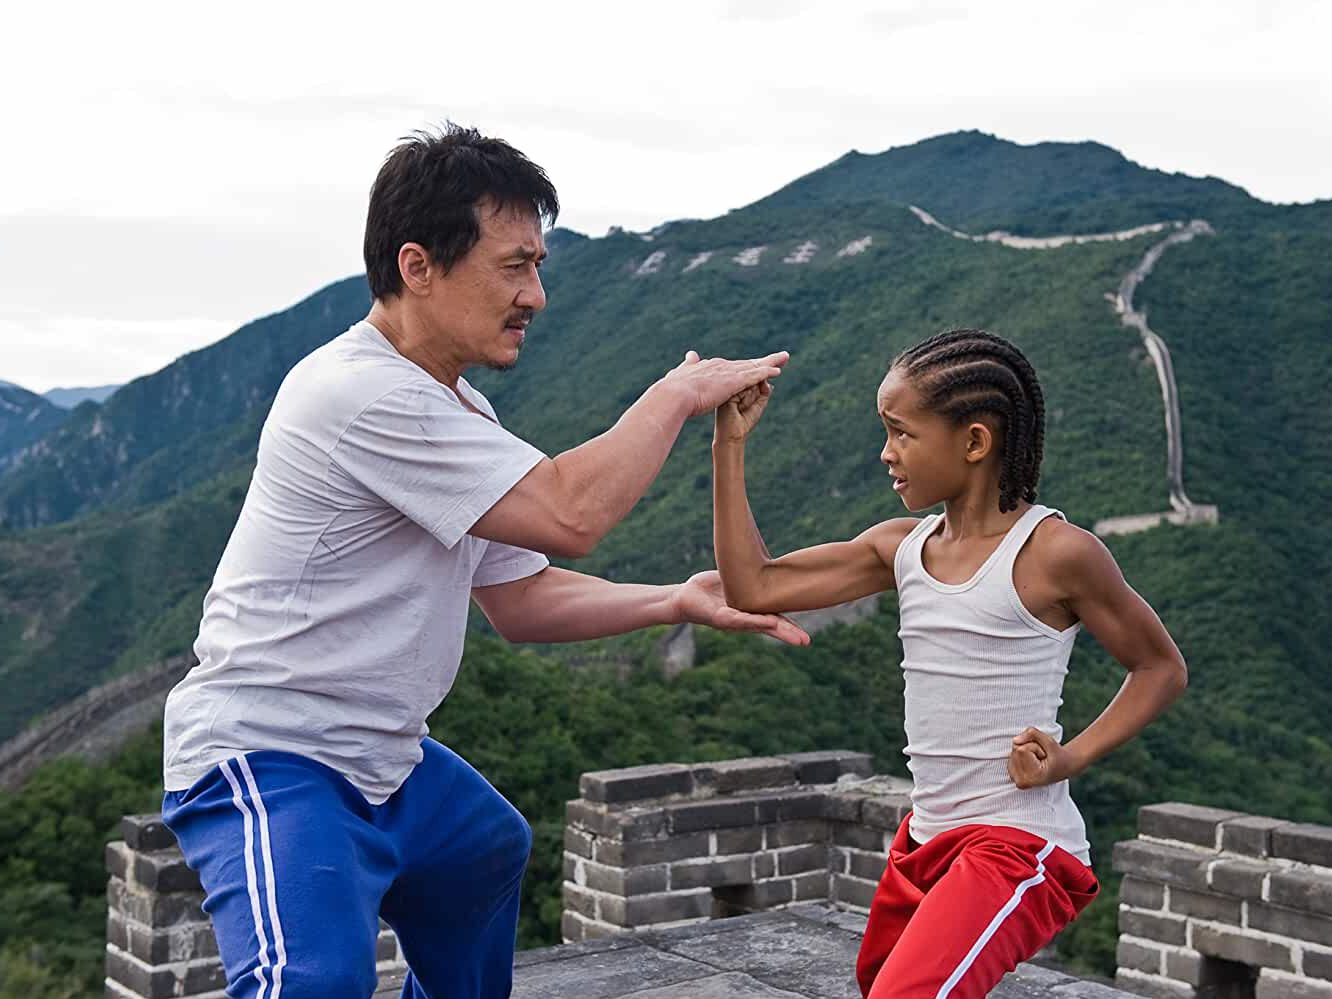 The Karate Kid – A Challenge He Never Imagined